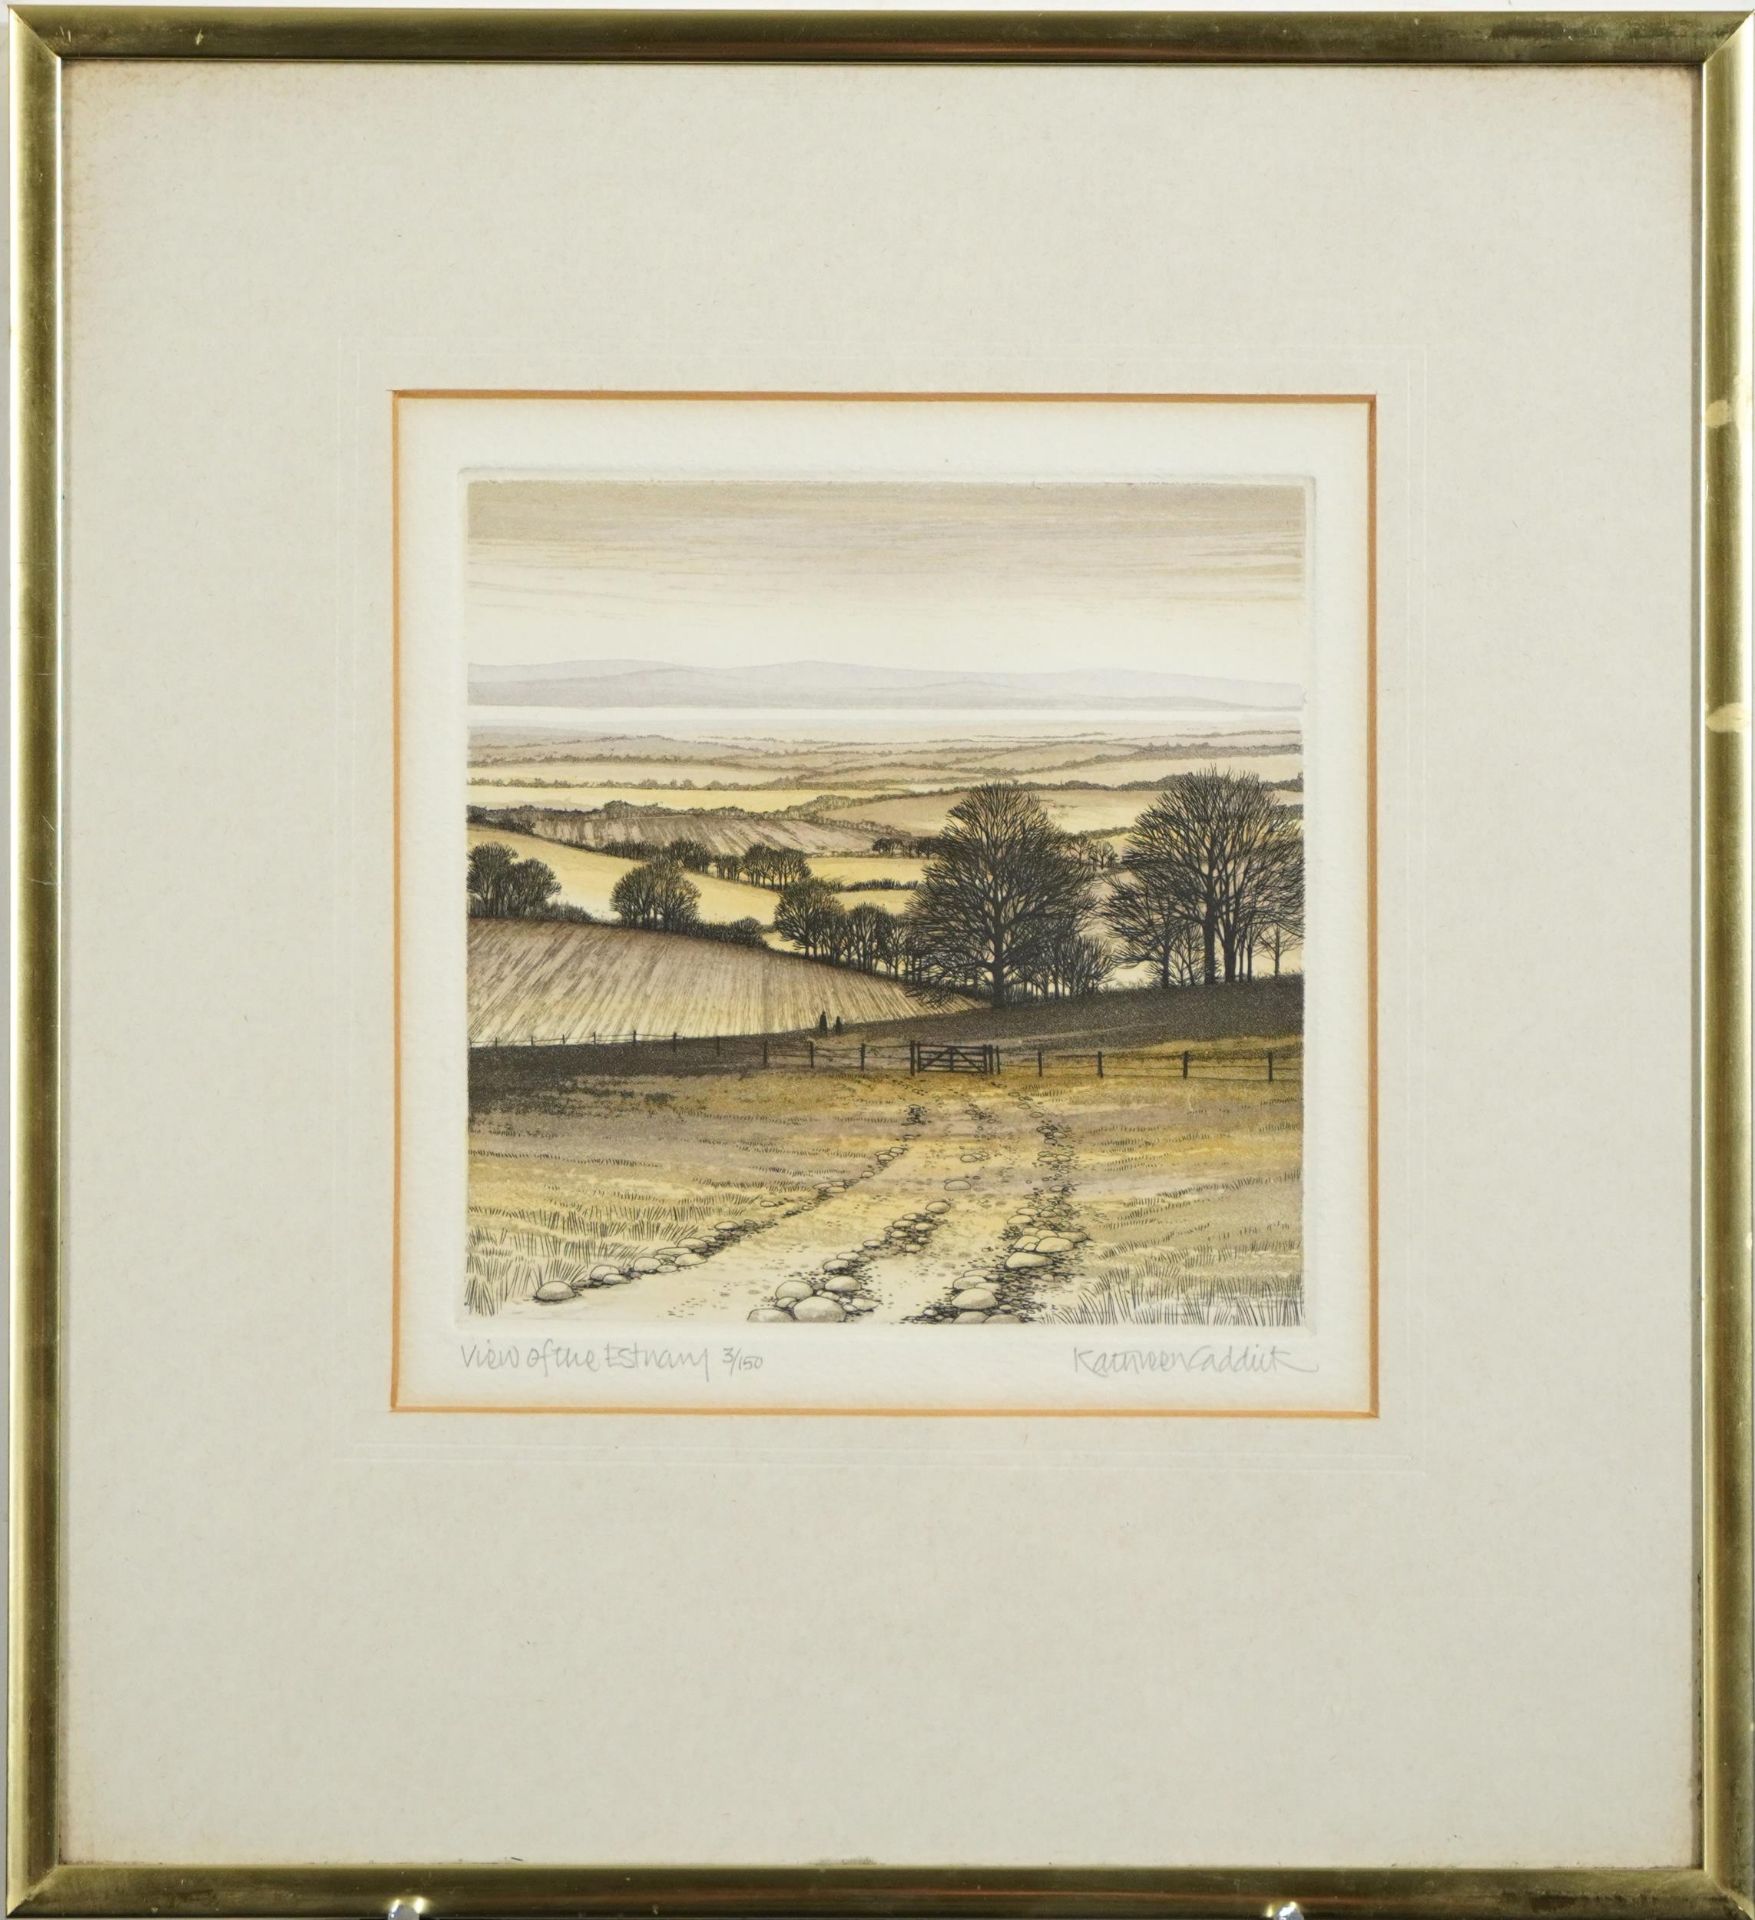 Kathleen Caddick - View of the Estuary, pencil signed print in colour, limited edition 3/150, - Image 2 of 4